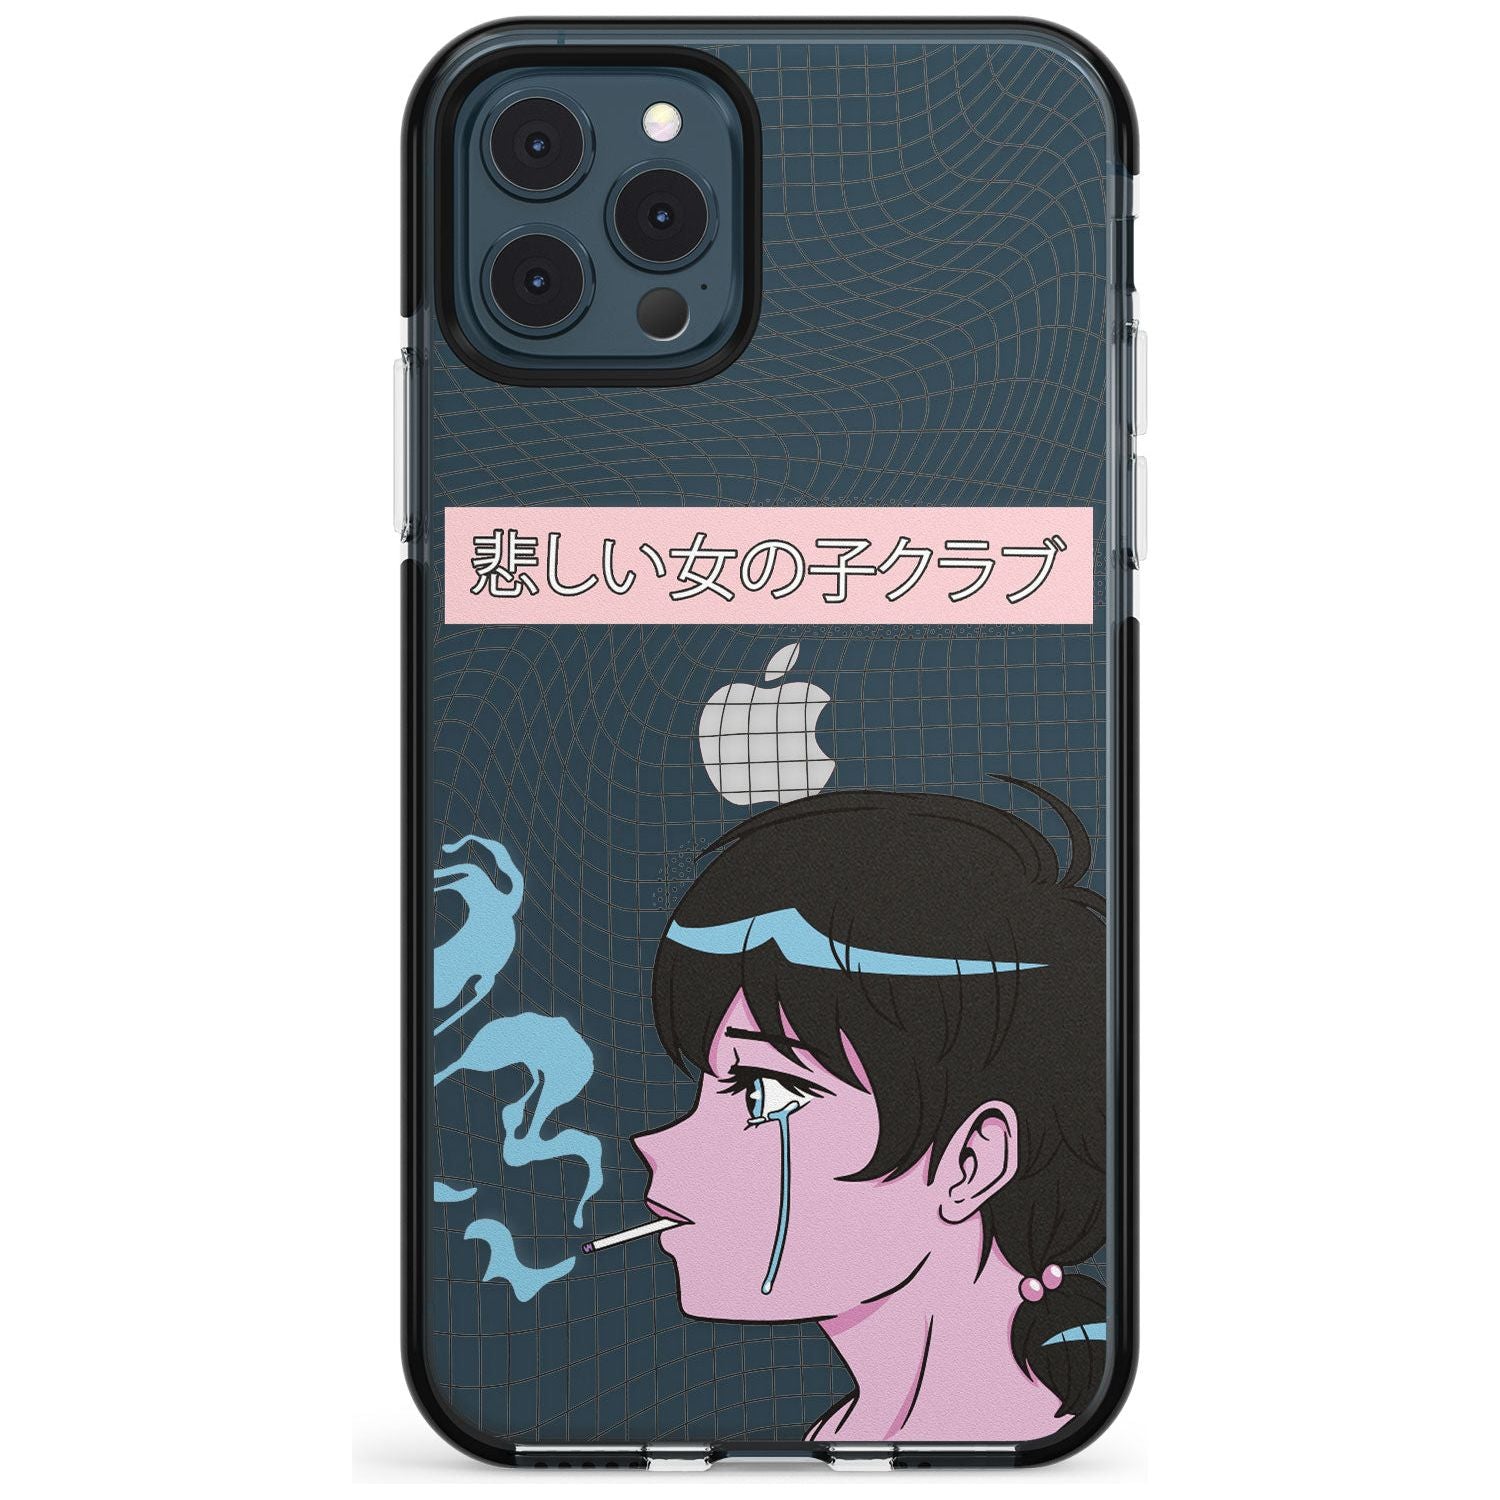 Lost Love Black Impact Phone Case for iPhone 11